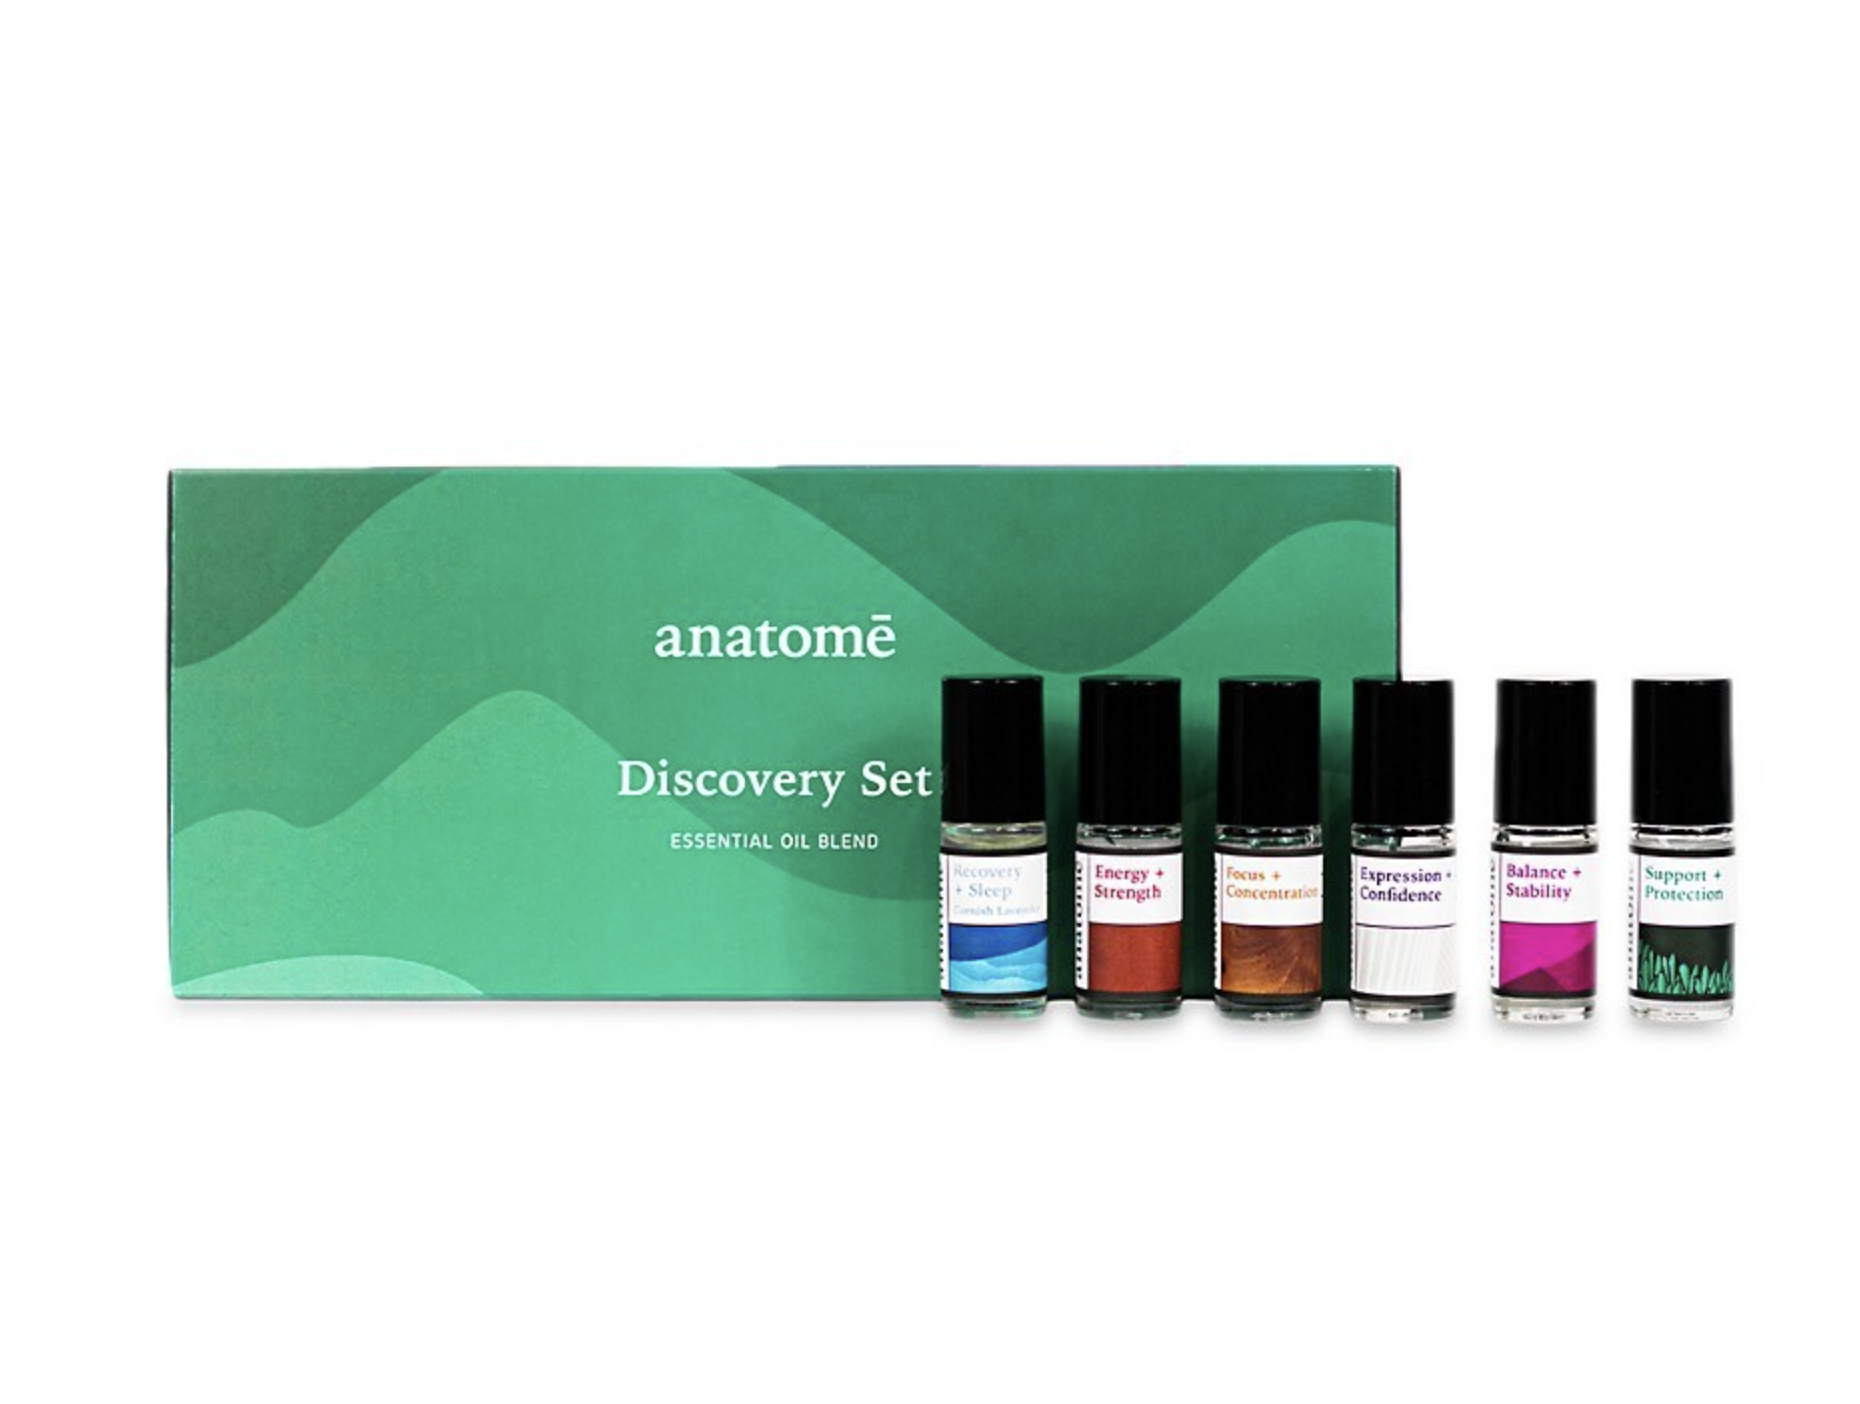 5-things-to-buy-in-the-month-of-March-anatome-oil-sleep-well-health-well-being